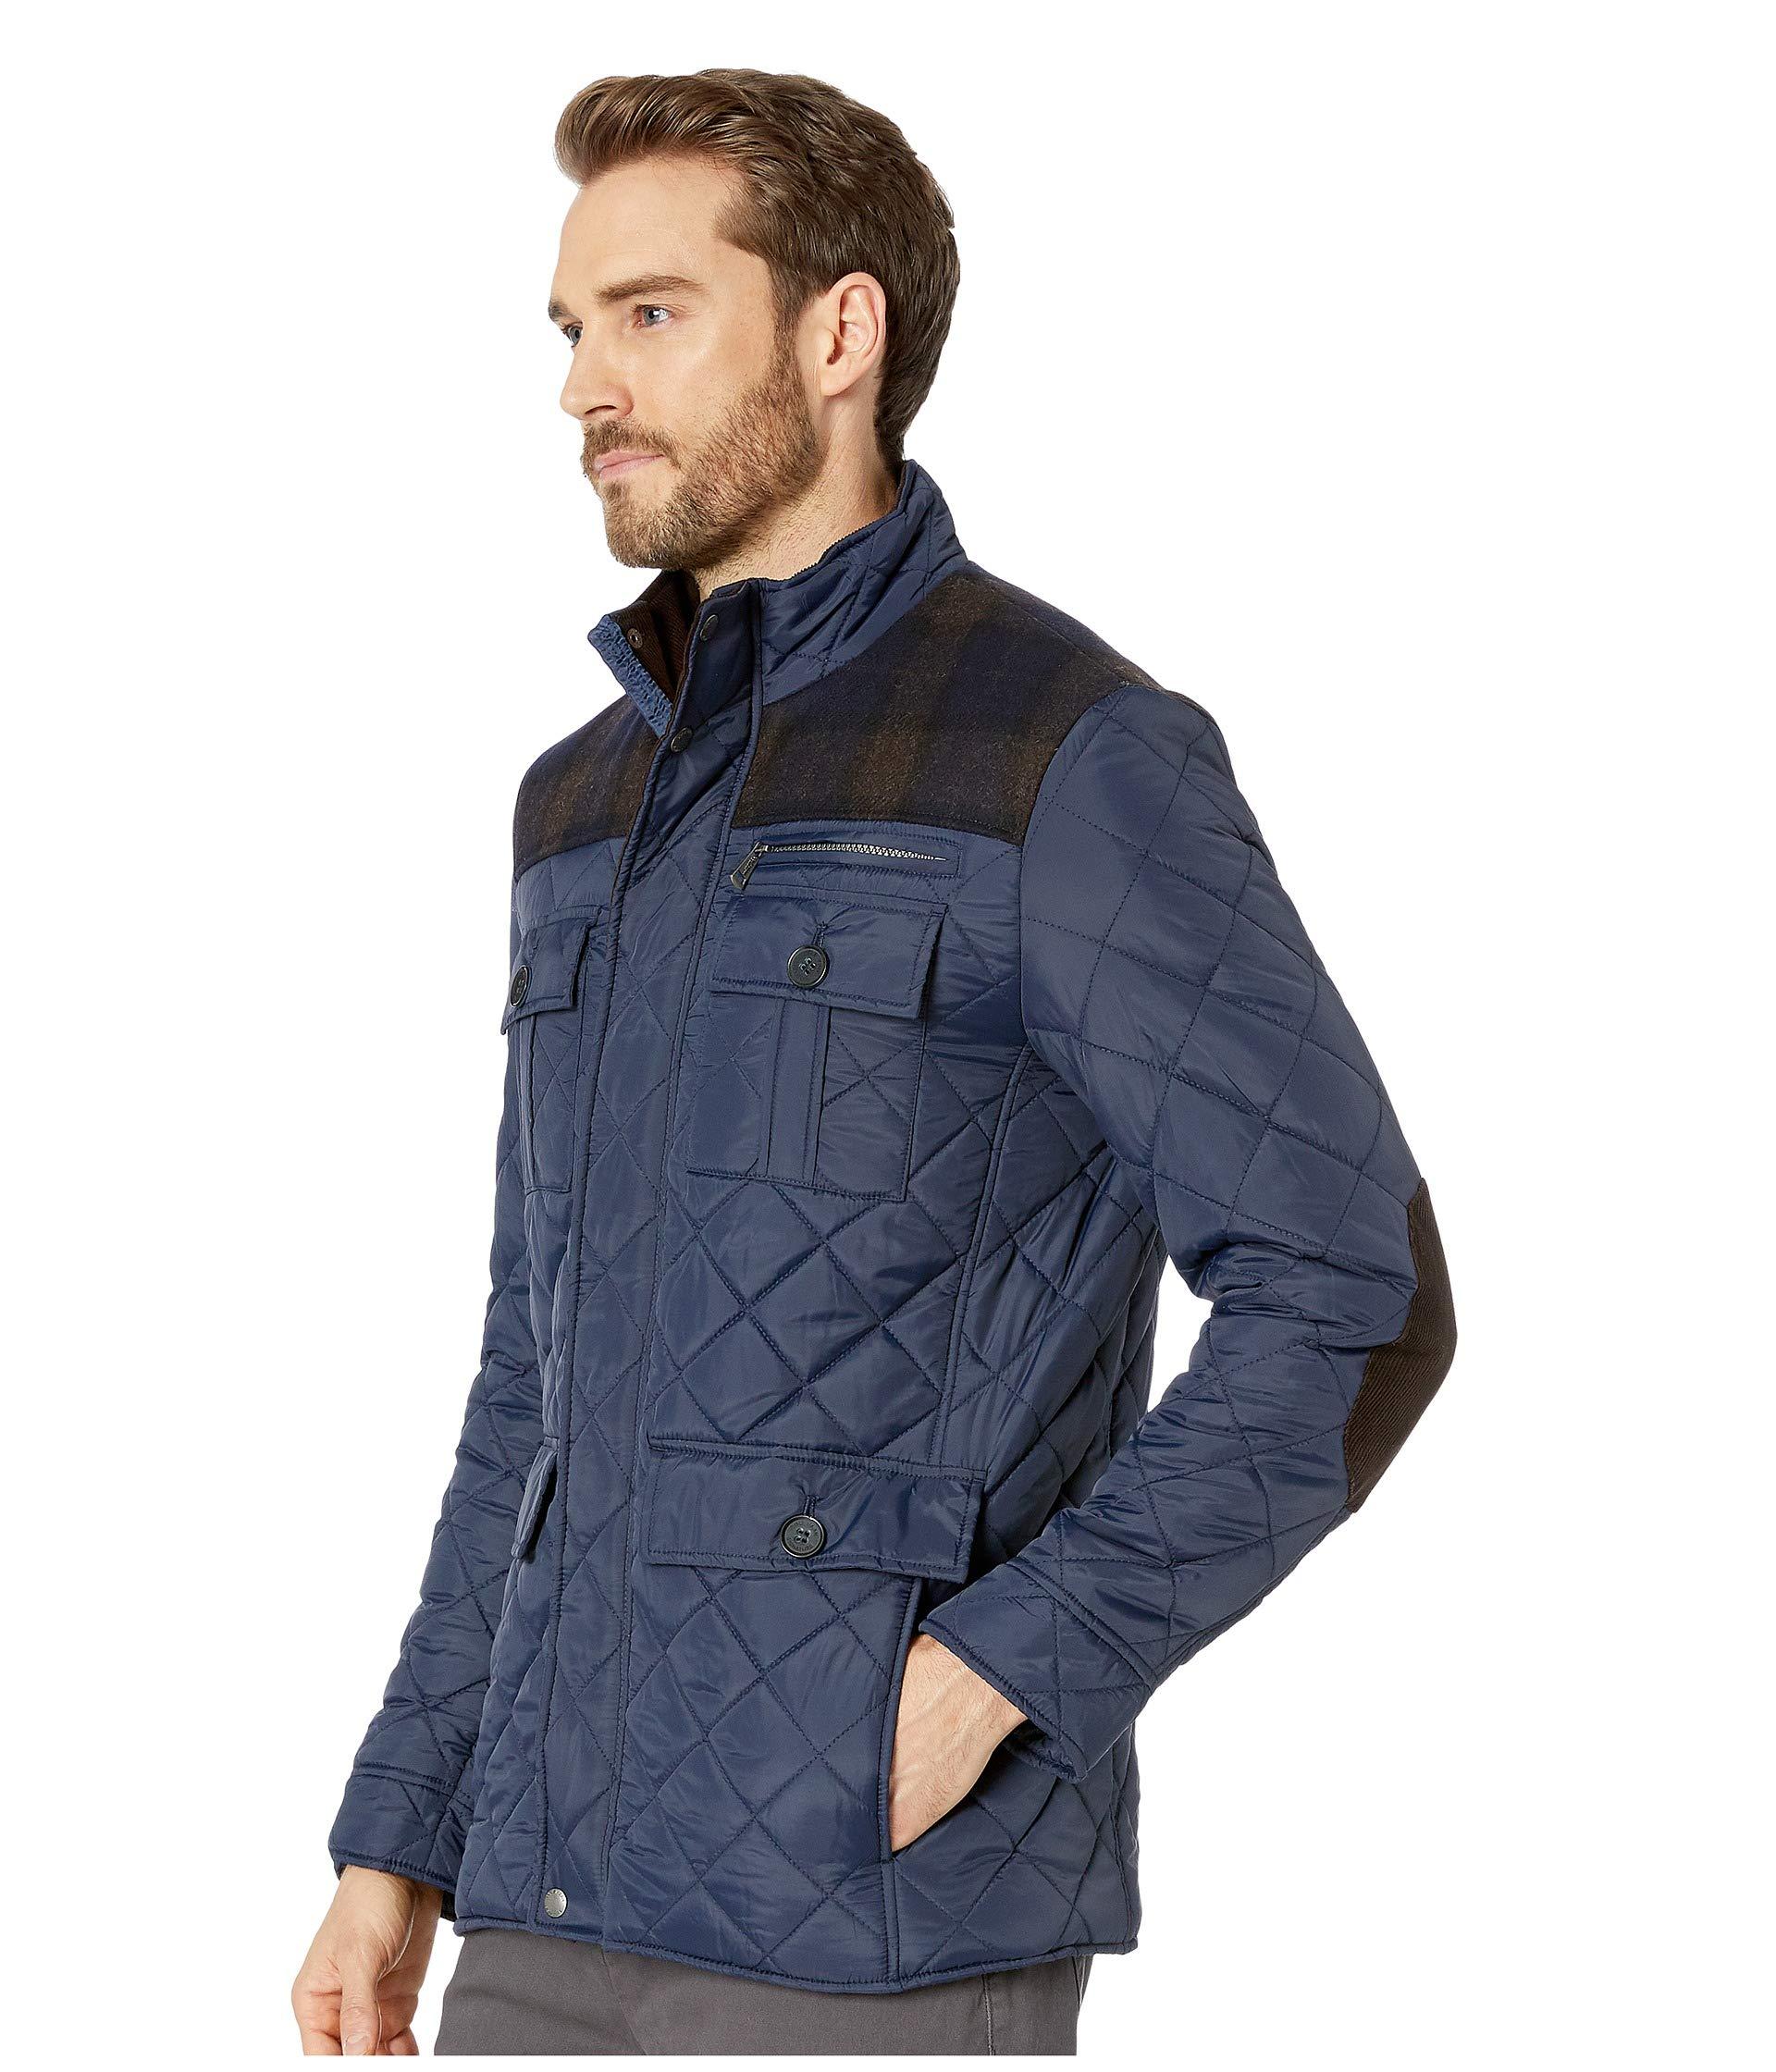 Cole Haan Synthetic Mixed Media Quilted Jacket in Navy (Blue) for Men